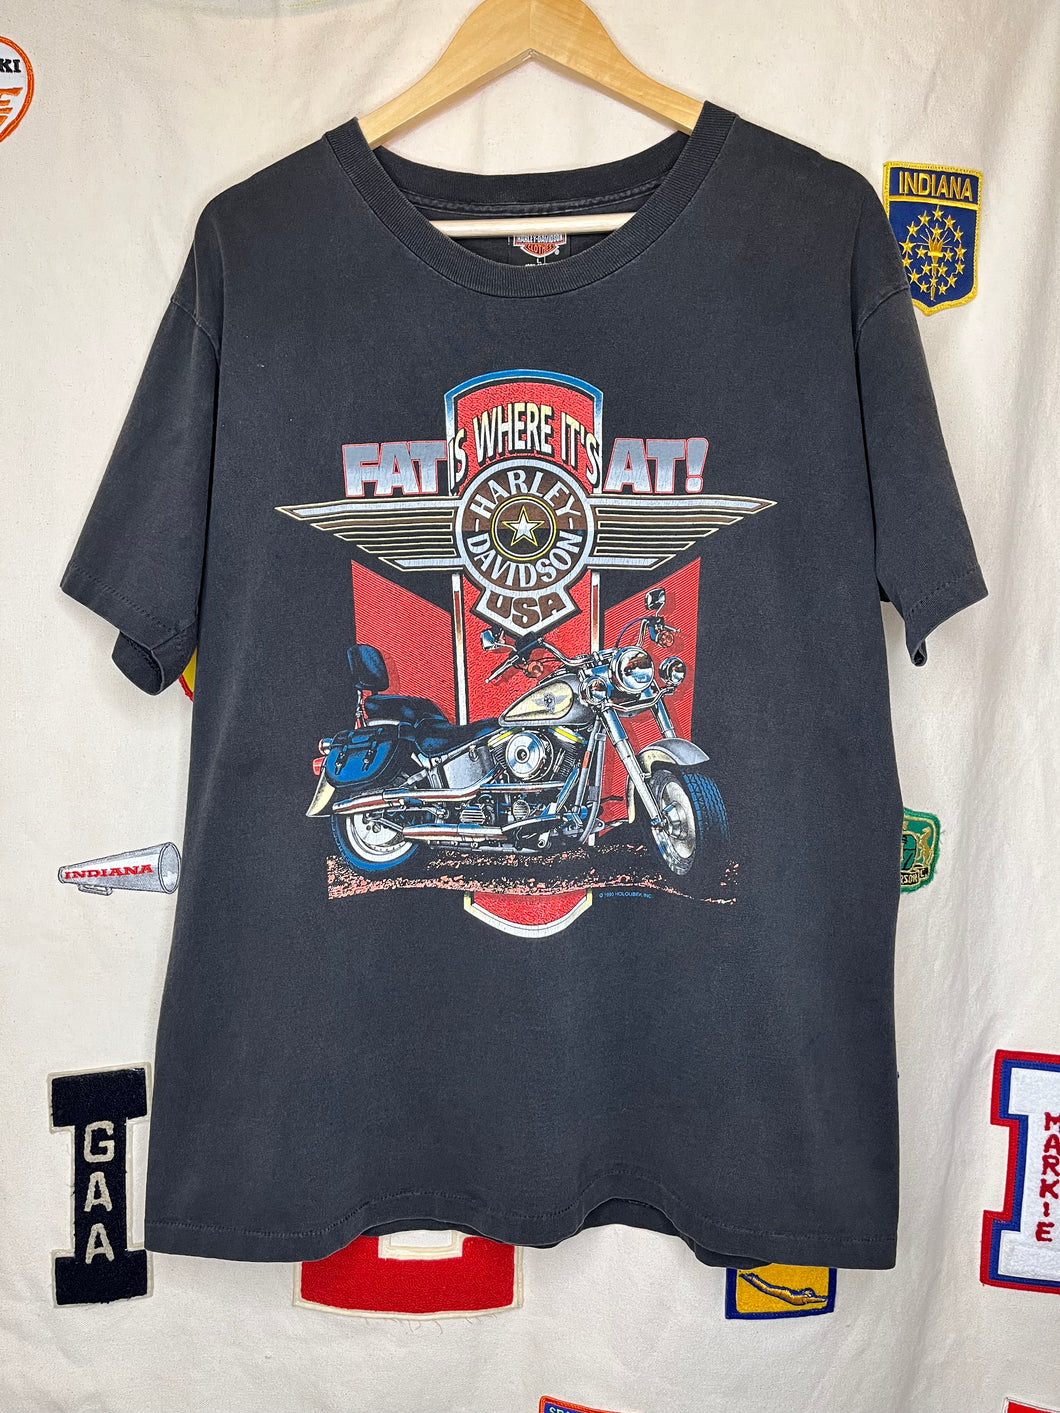 Vintage Fat is Where it’s At Harley Davidson T-Shirt: Large